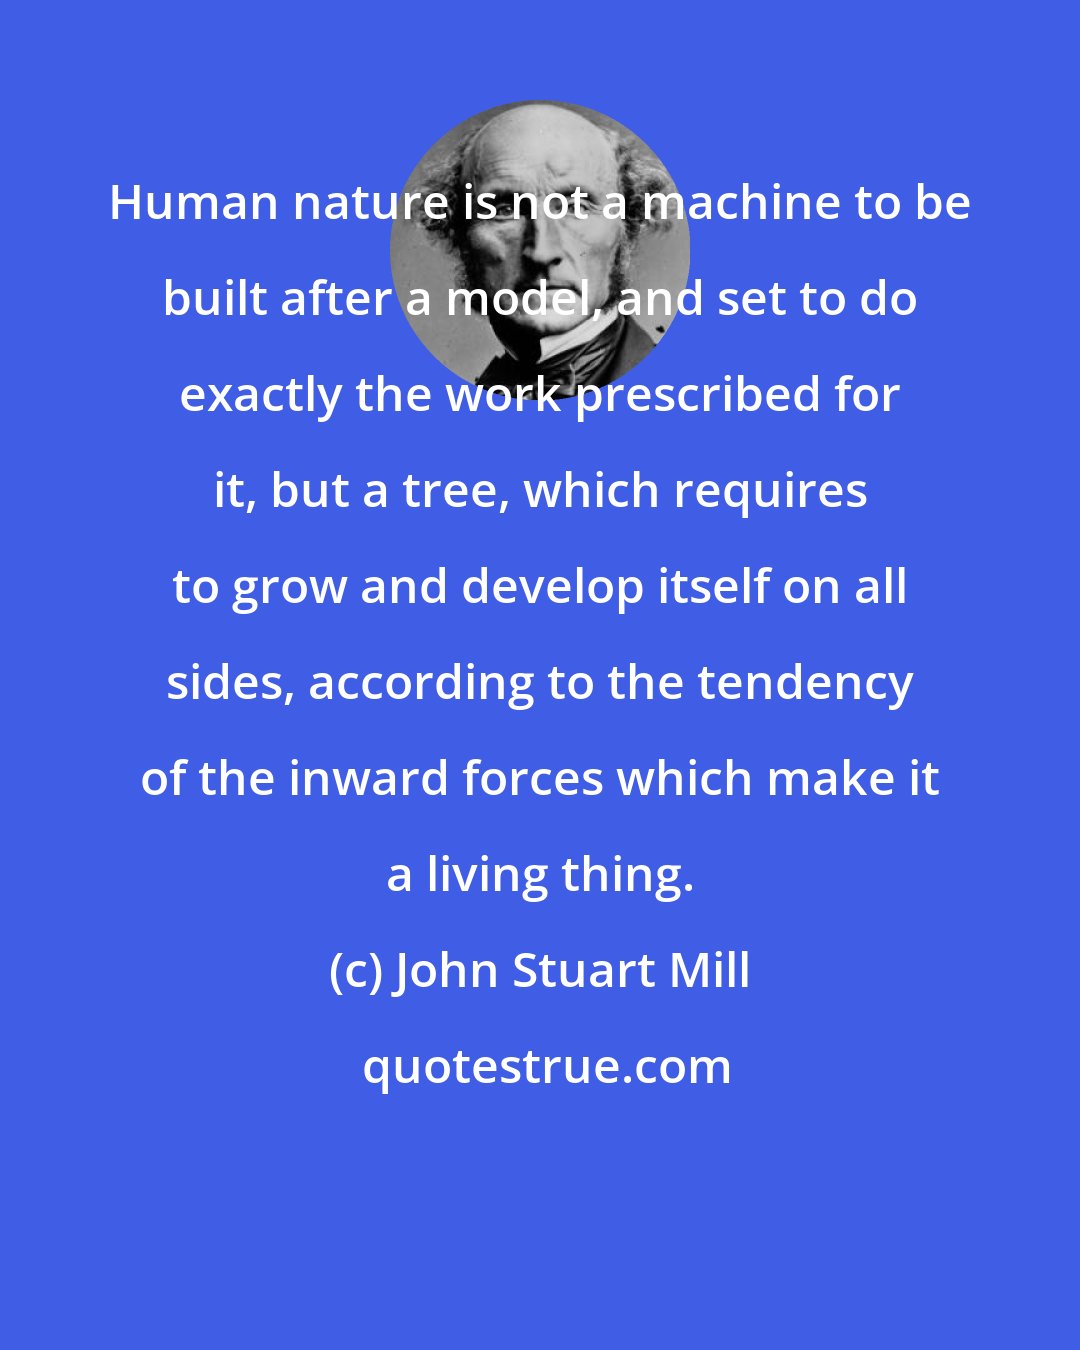 John Stuart Mill: Human nature is not a machine to be built after a model, and set to do exactly the work prescribed for it, but a tree, which requires to grow and develop itself on all sides, according to the tendency of the inward forces which make it a living thing.